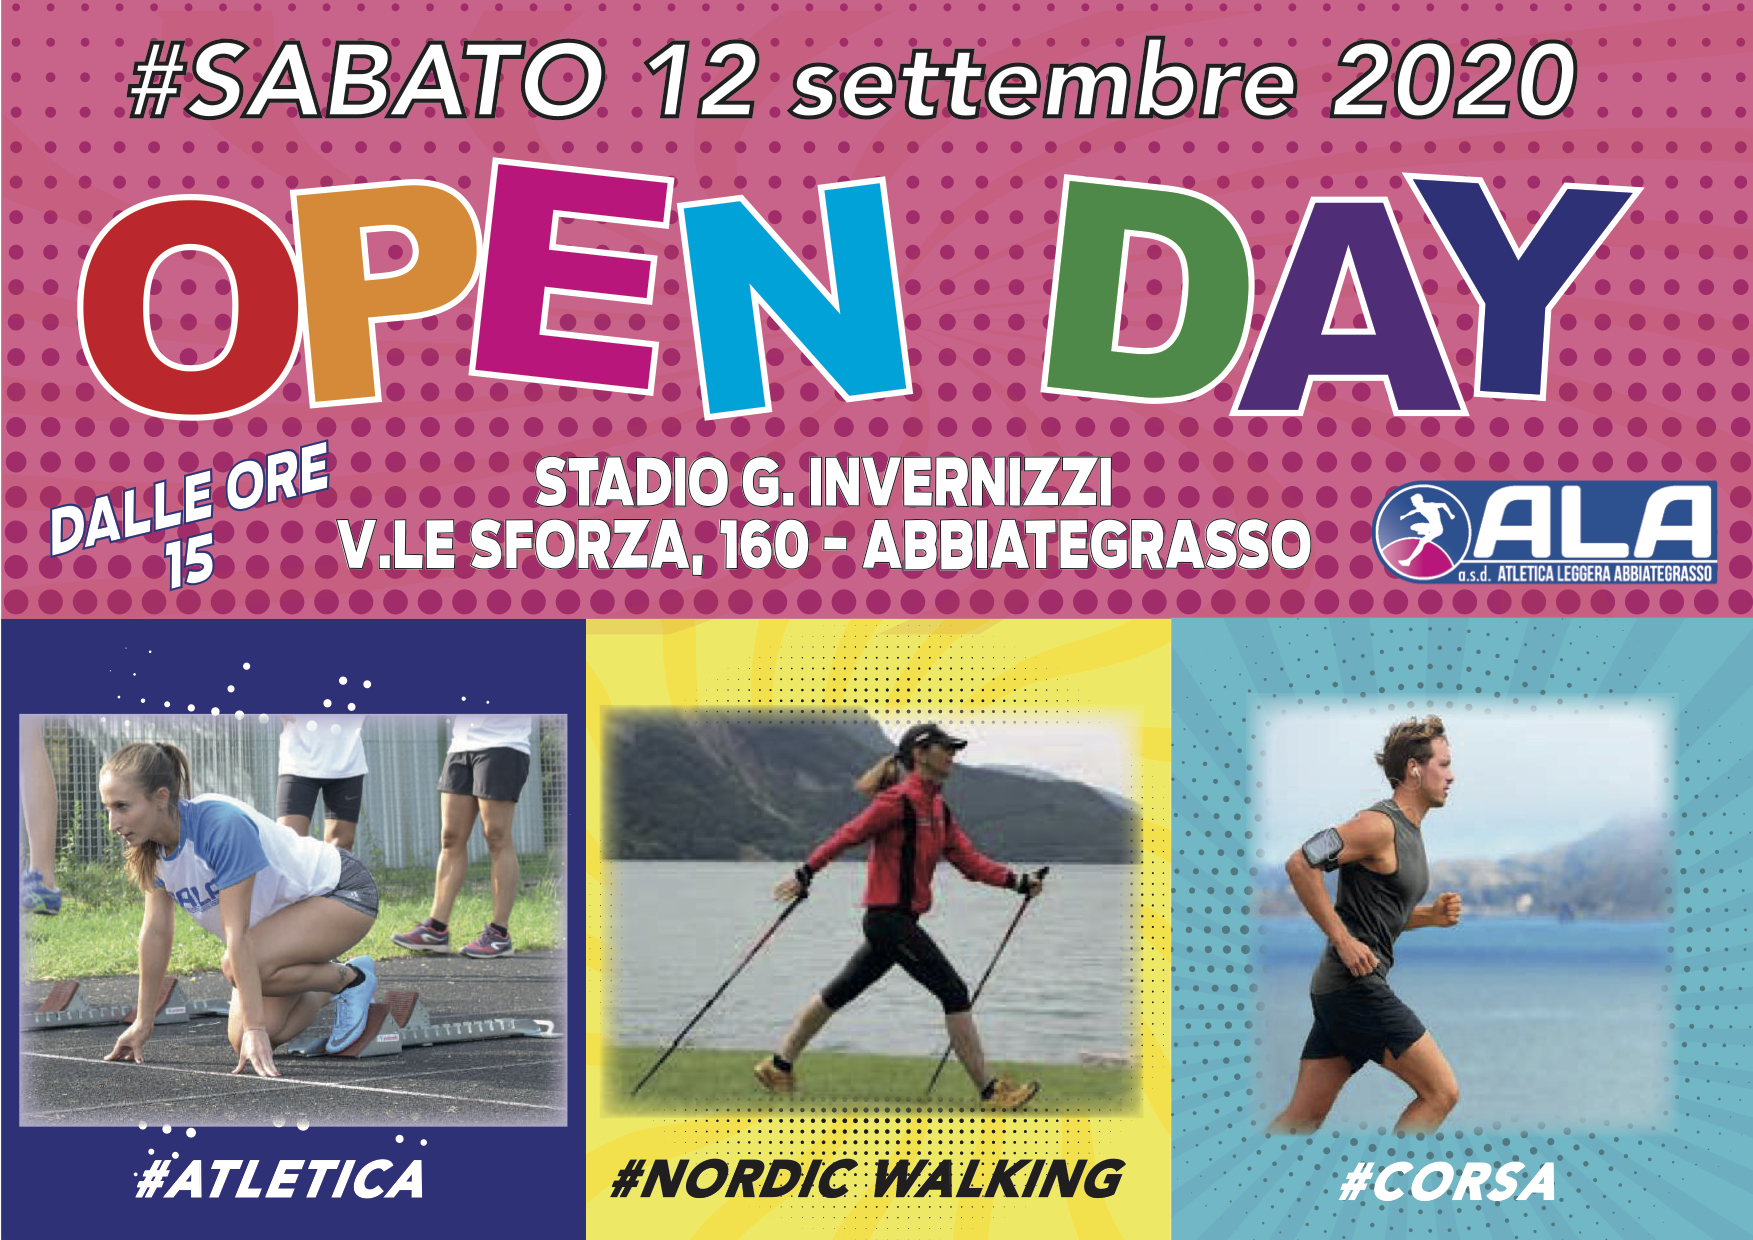 #OPEN DAY 2020